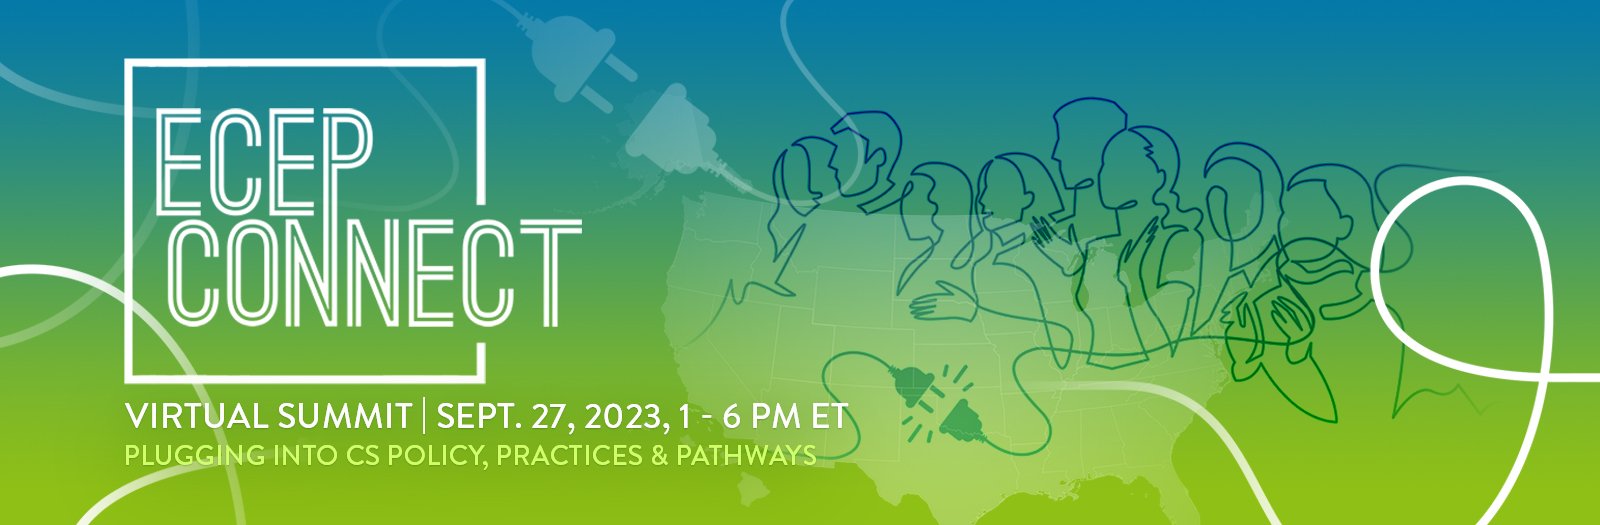 ECEP Connect | Virtual Summit | September 27, 2023